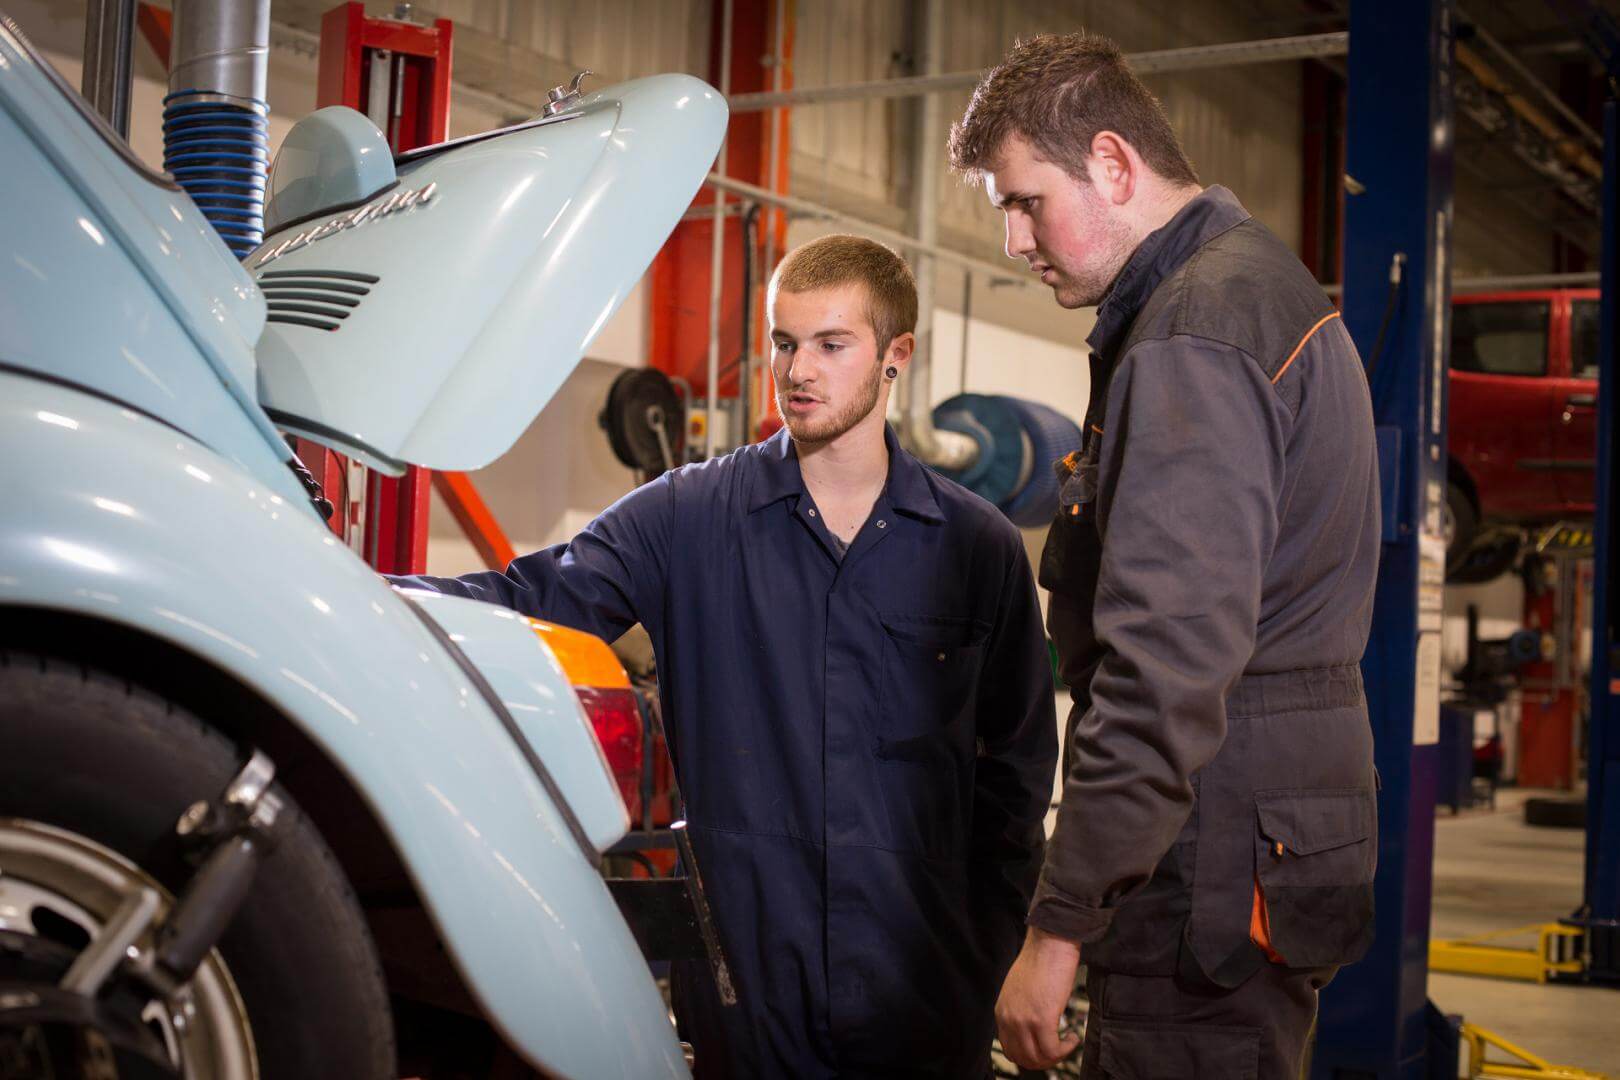 Auto motive tutor showing a student the engine of a car